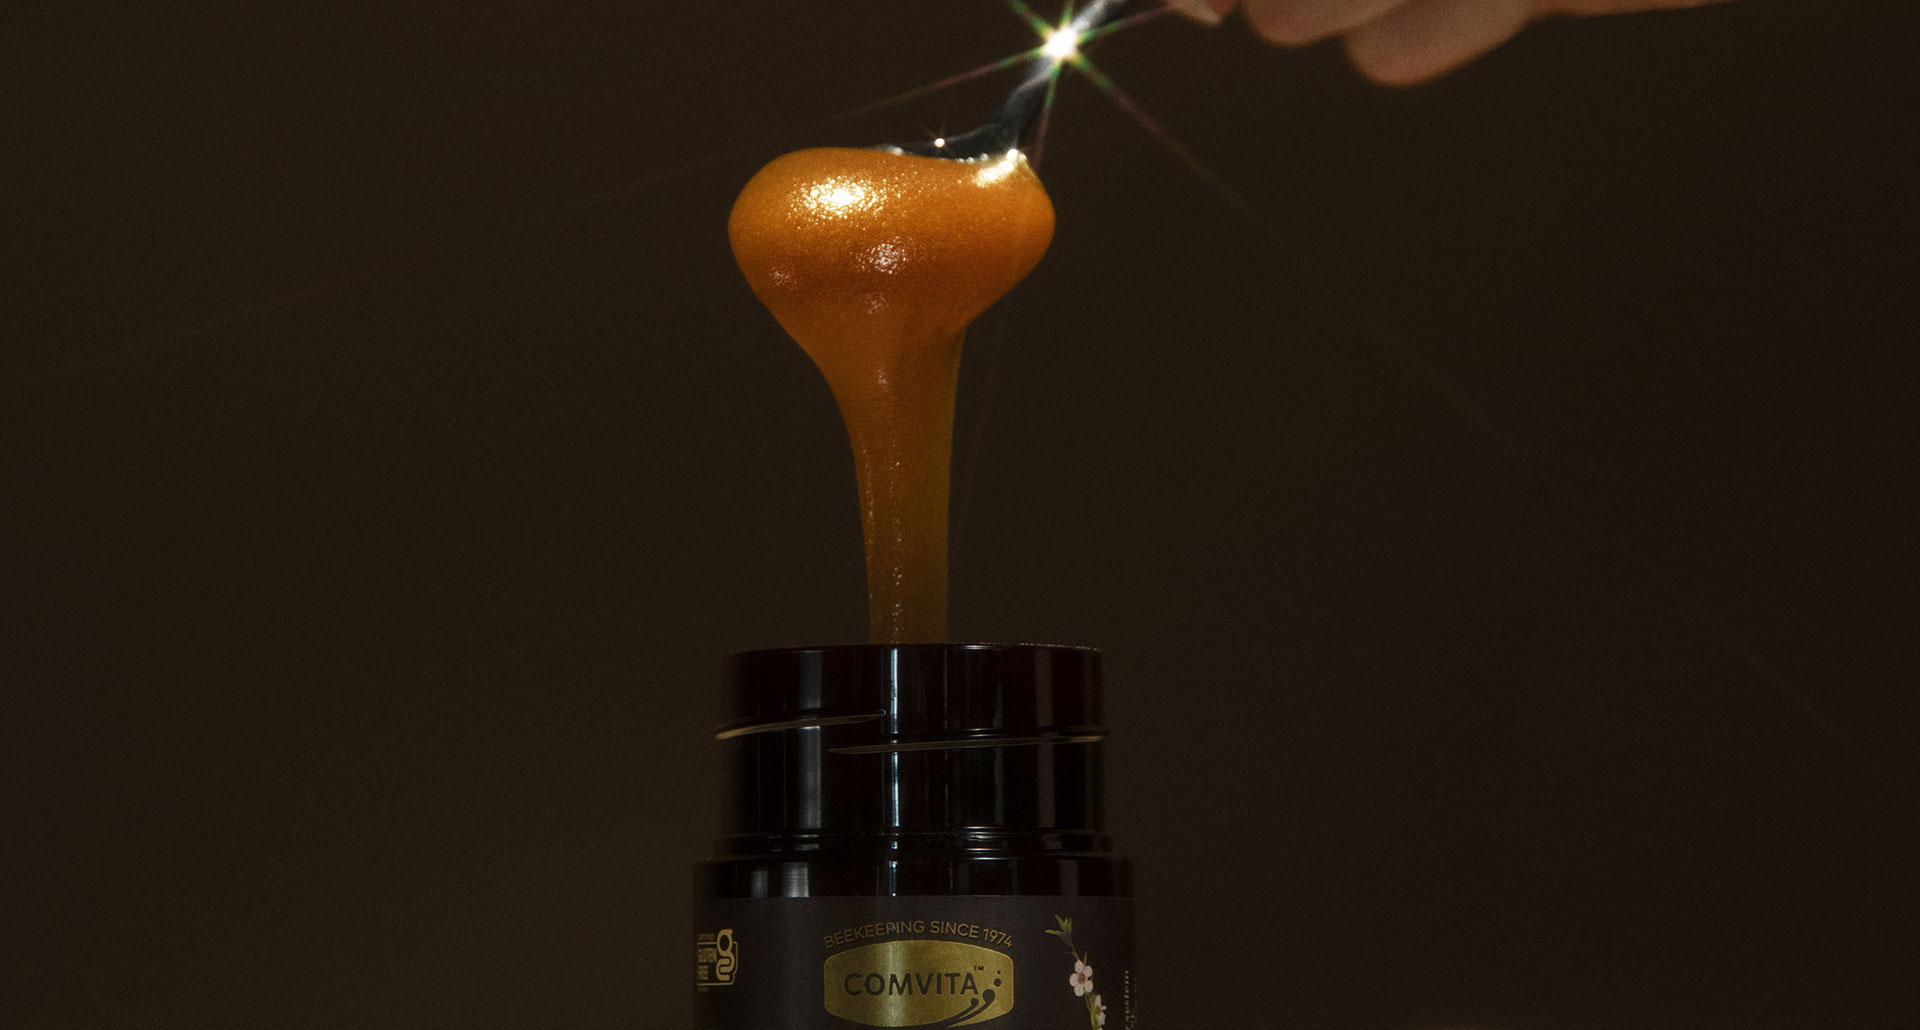 <h1 style="text-align: center;"><span style="color: rgb(236, 240, 241); font-size: 36pt;">Nature's most powerful honey</span></h1>